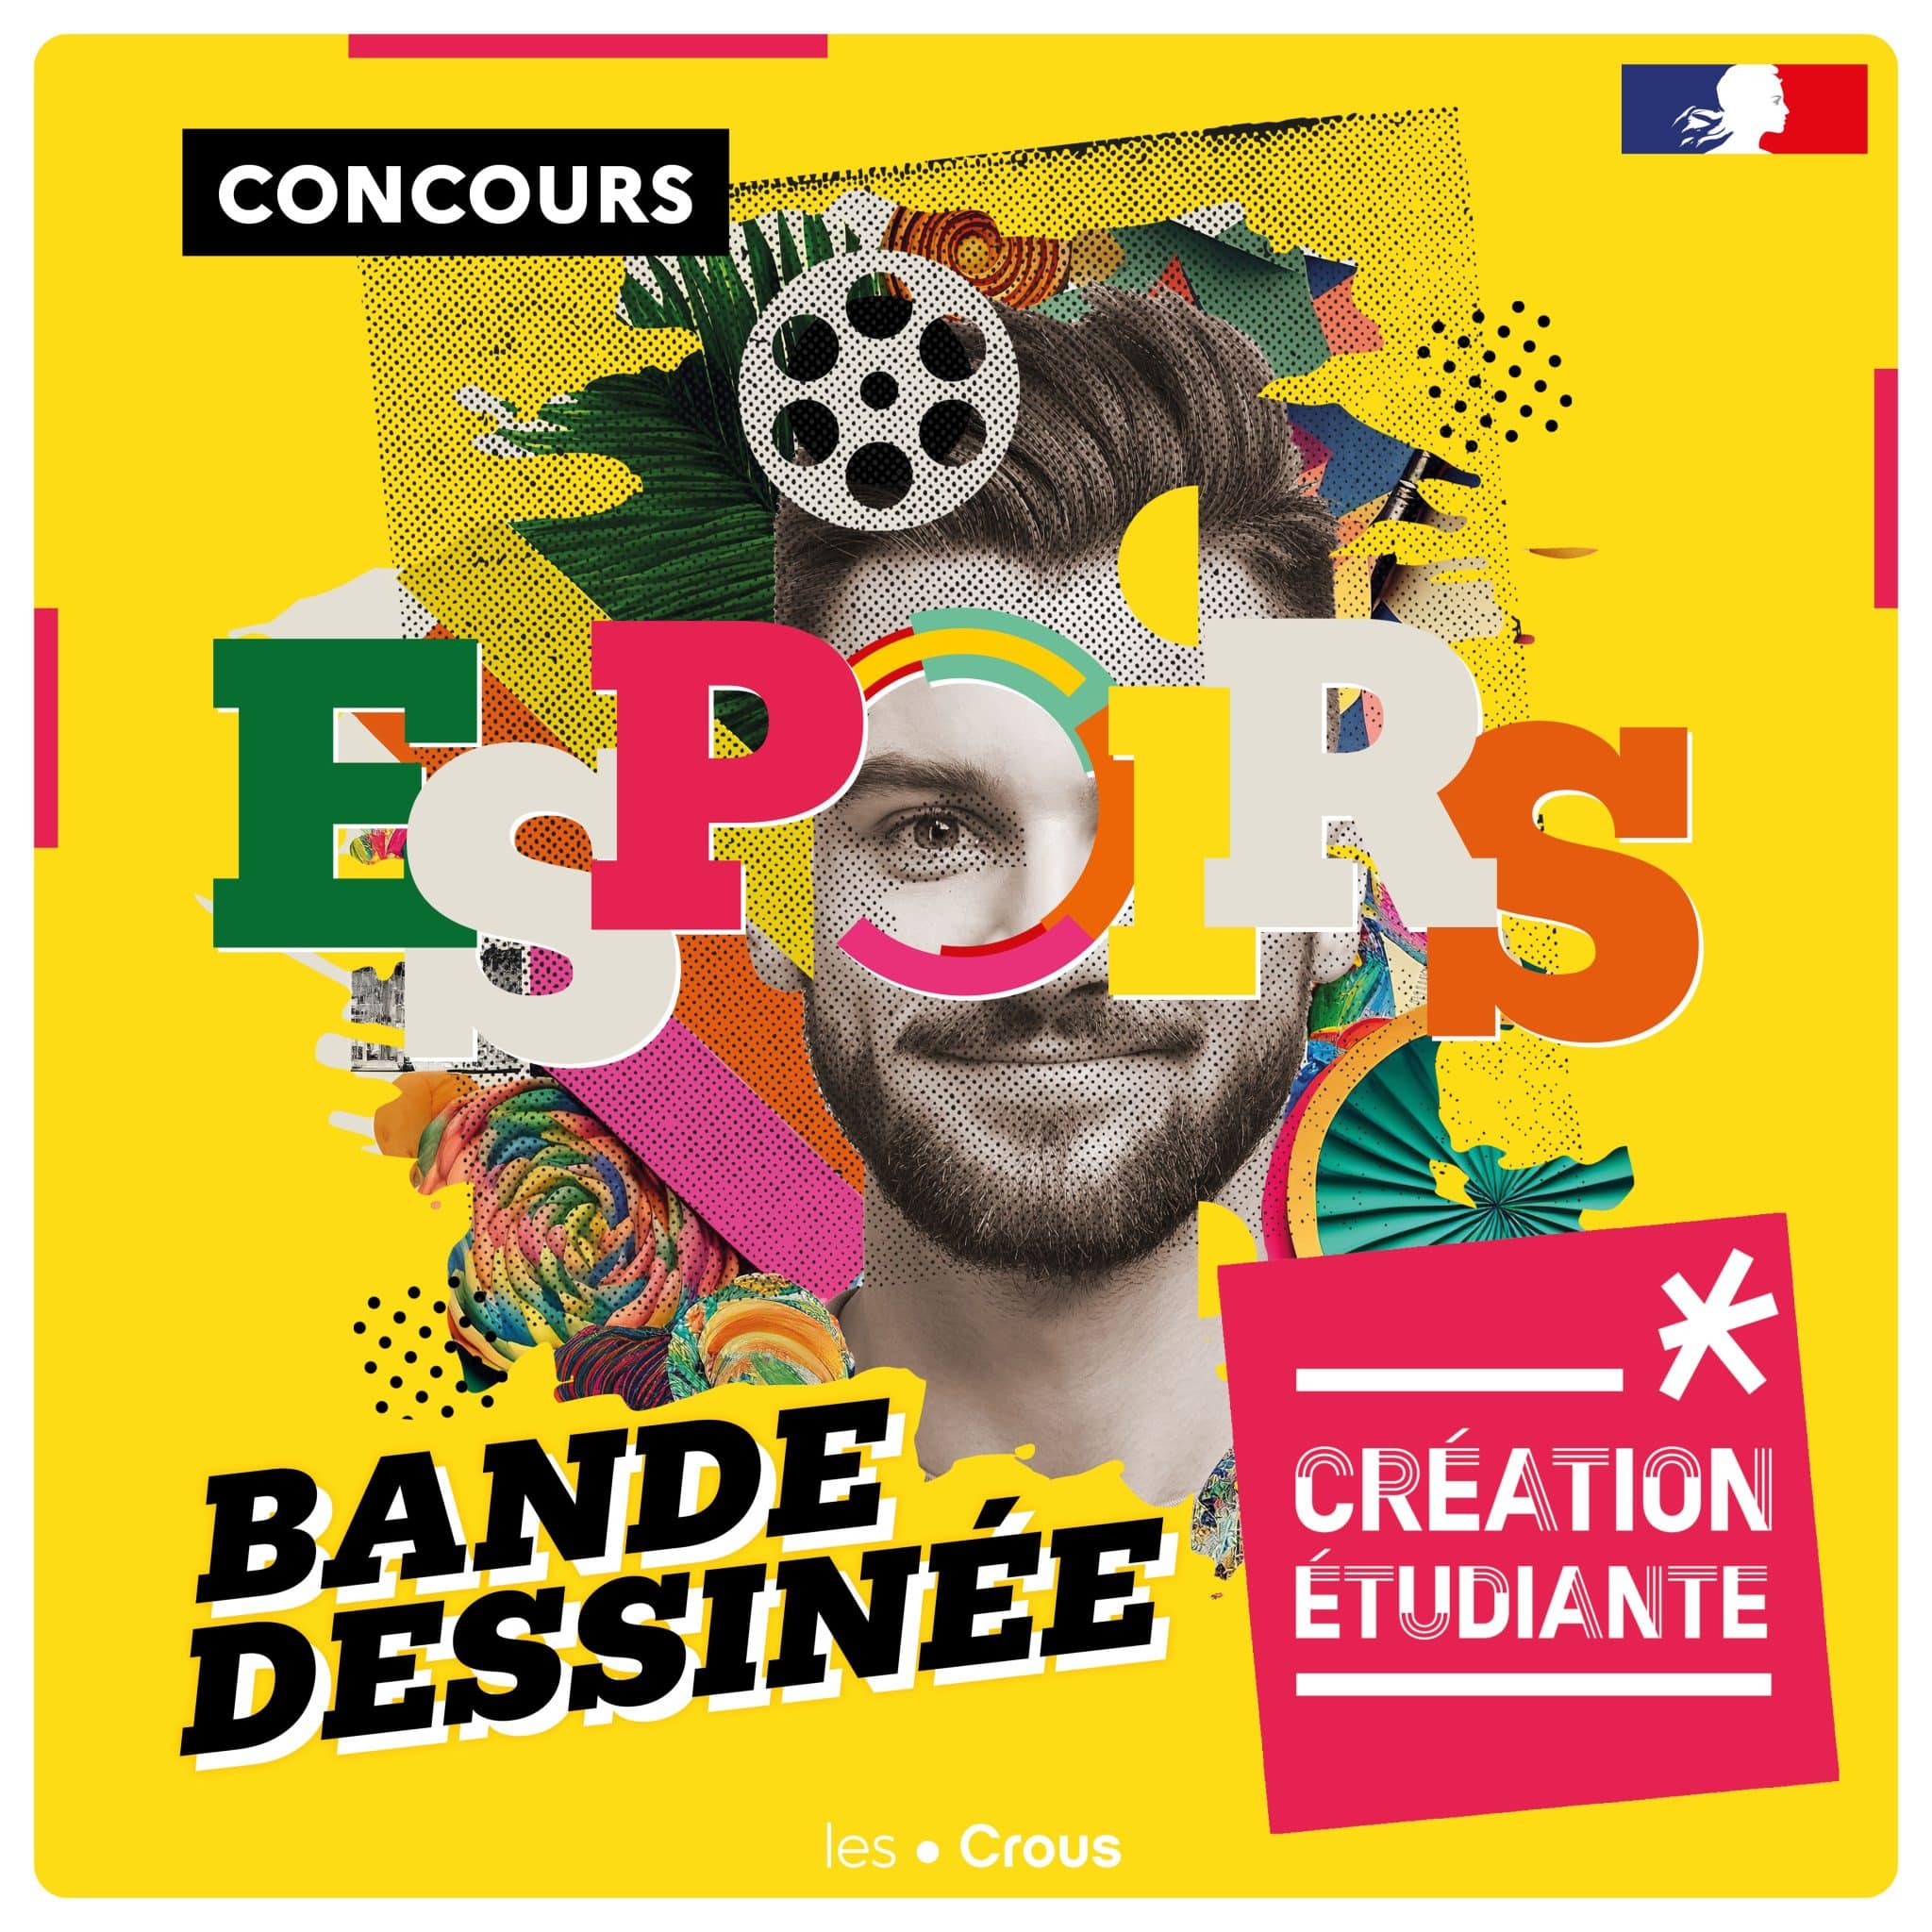 0143 23 CNOUS CAMPAGNE CULTURELLE RS CONCOURS BAT1 BD2 compressed scaled